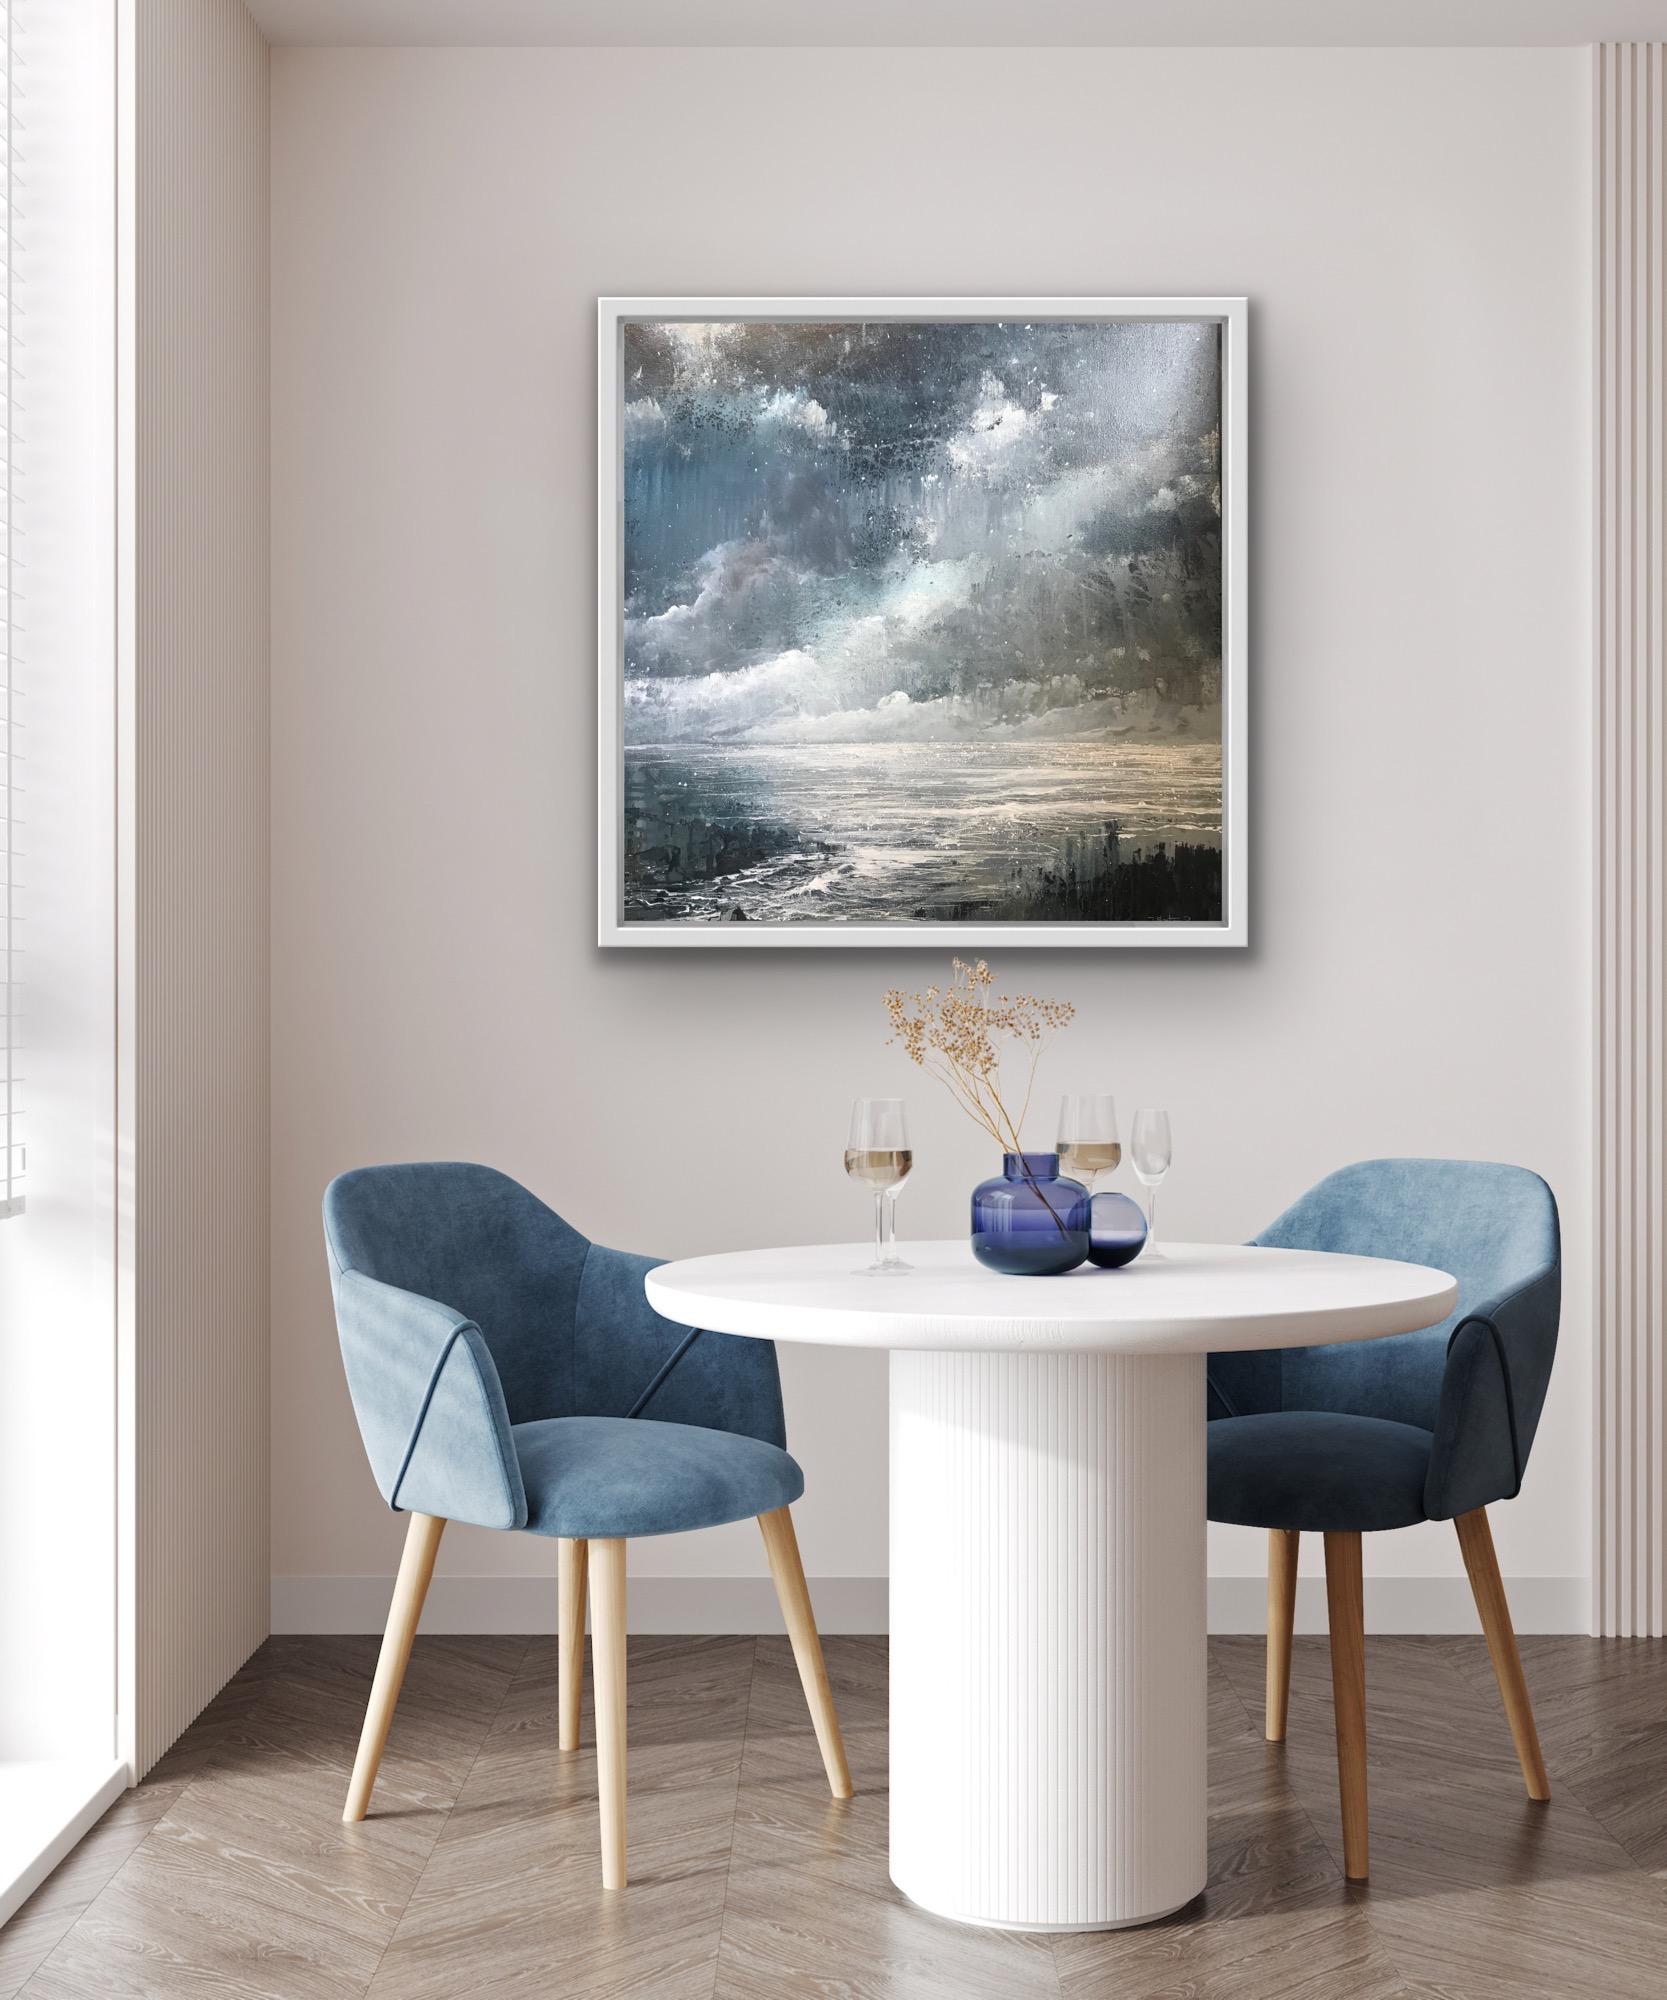 Darkness at the Coast, Original painting, Contemporary Seascape, Mixed media oil - Painting by James Bonstow